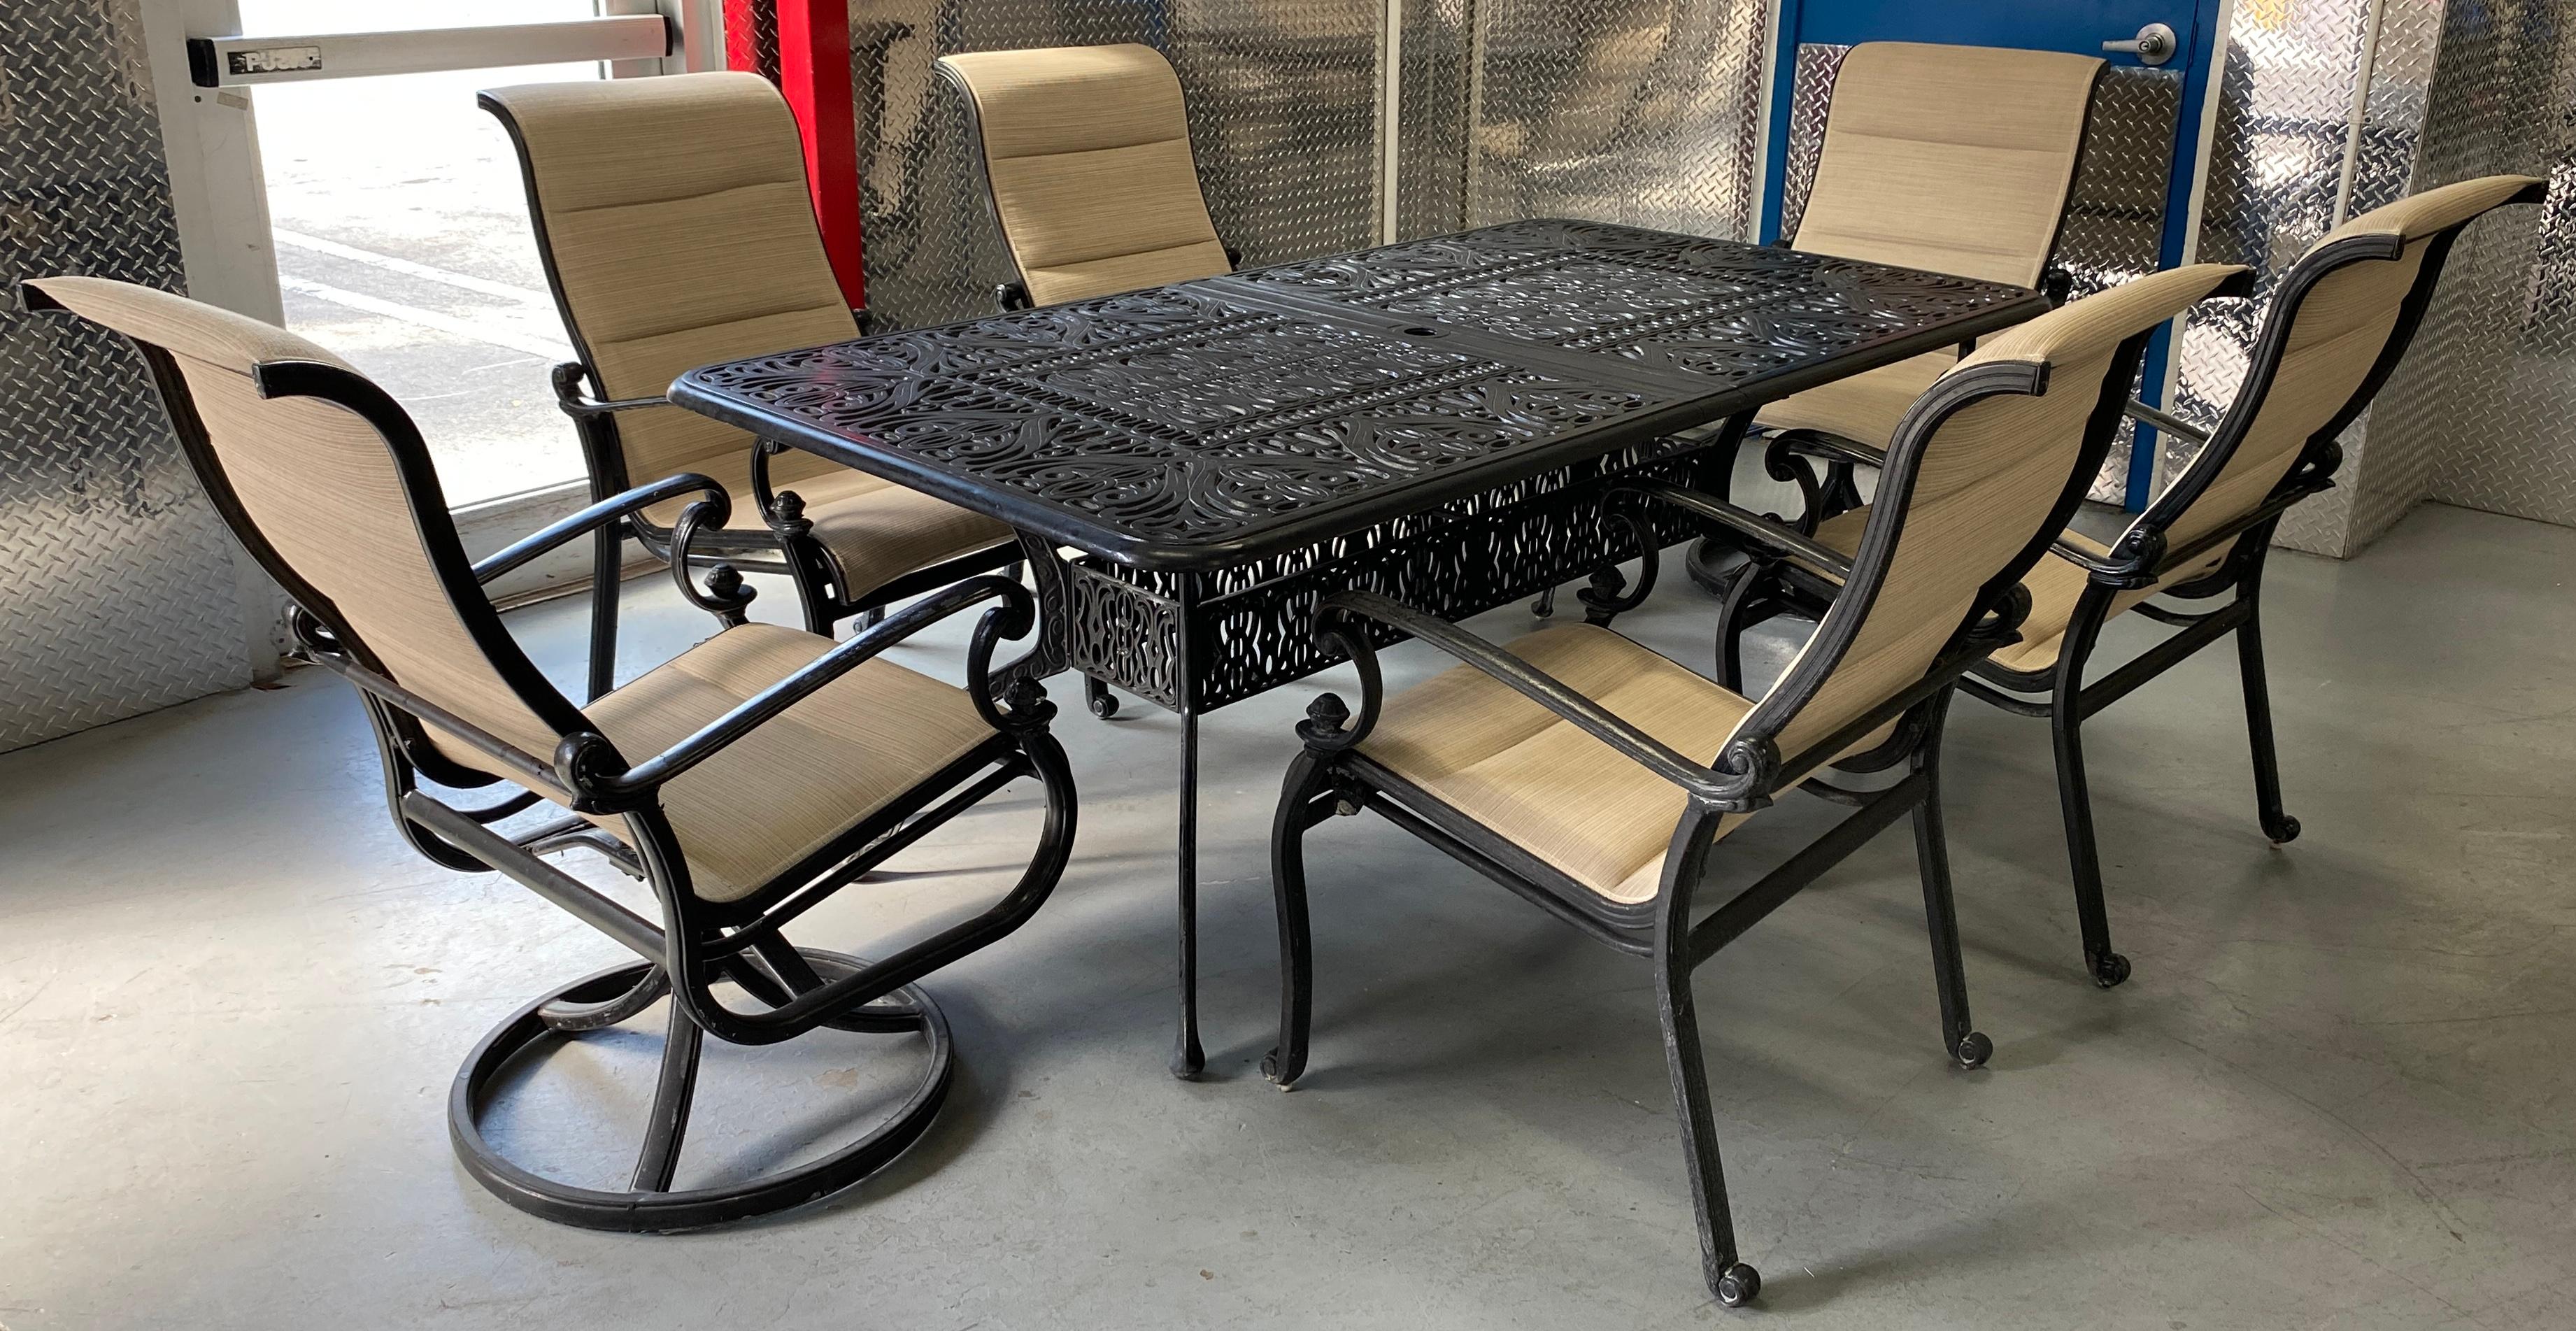 A lovely vintage Garden Dining Set in the Russell Woodard Style. The entire set is made of practical cast aluminum includes an extendable dining table, 6 armchairs, 2 lounge chairs and an accent table. 

The intricately detailed extendable outdoor